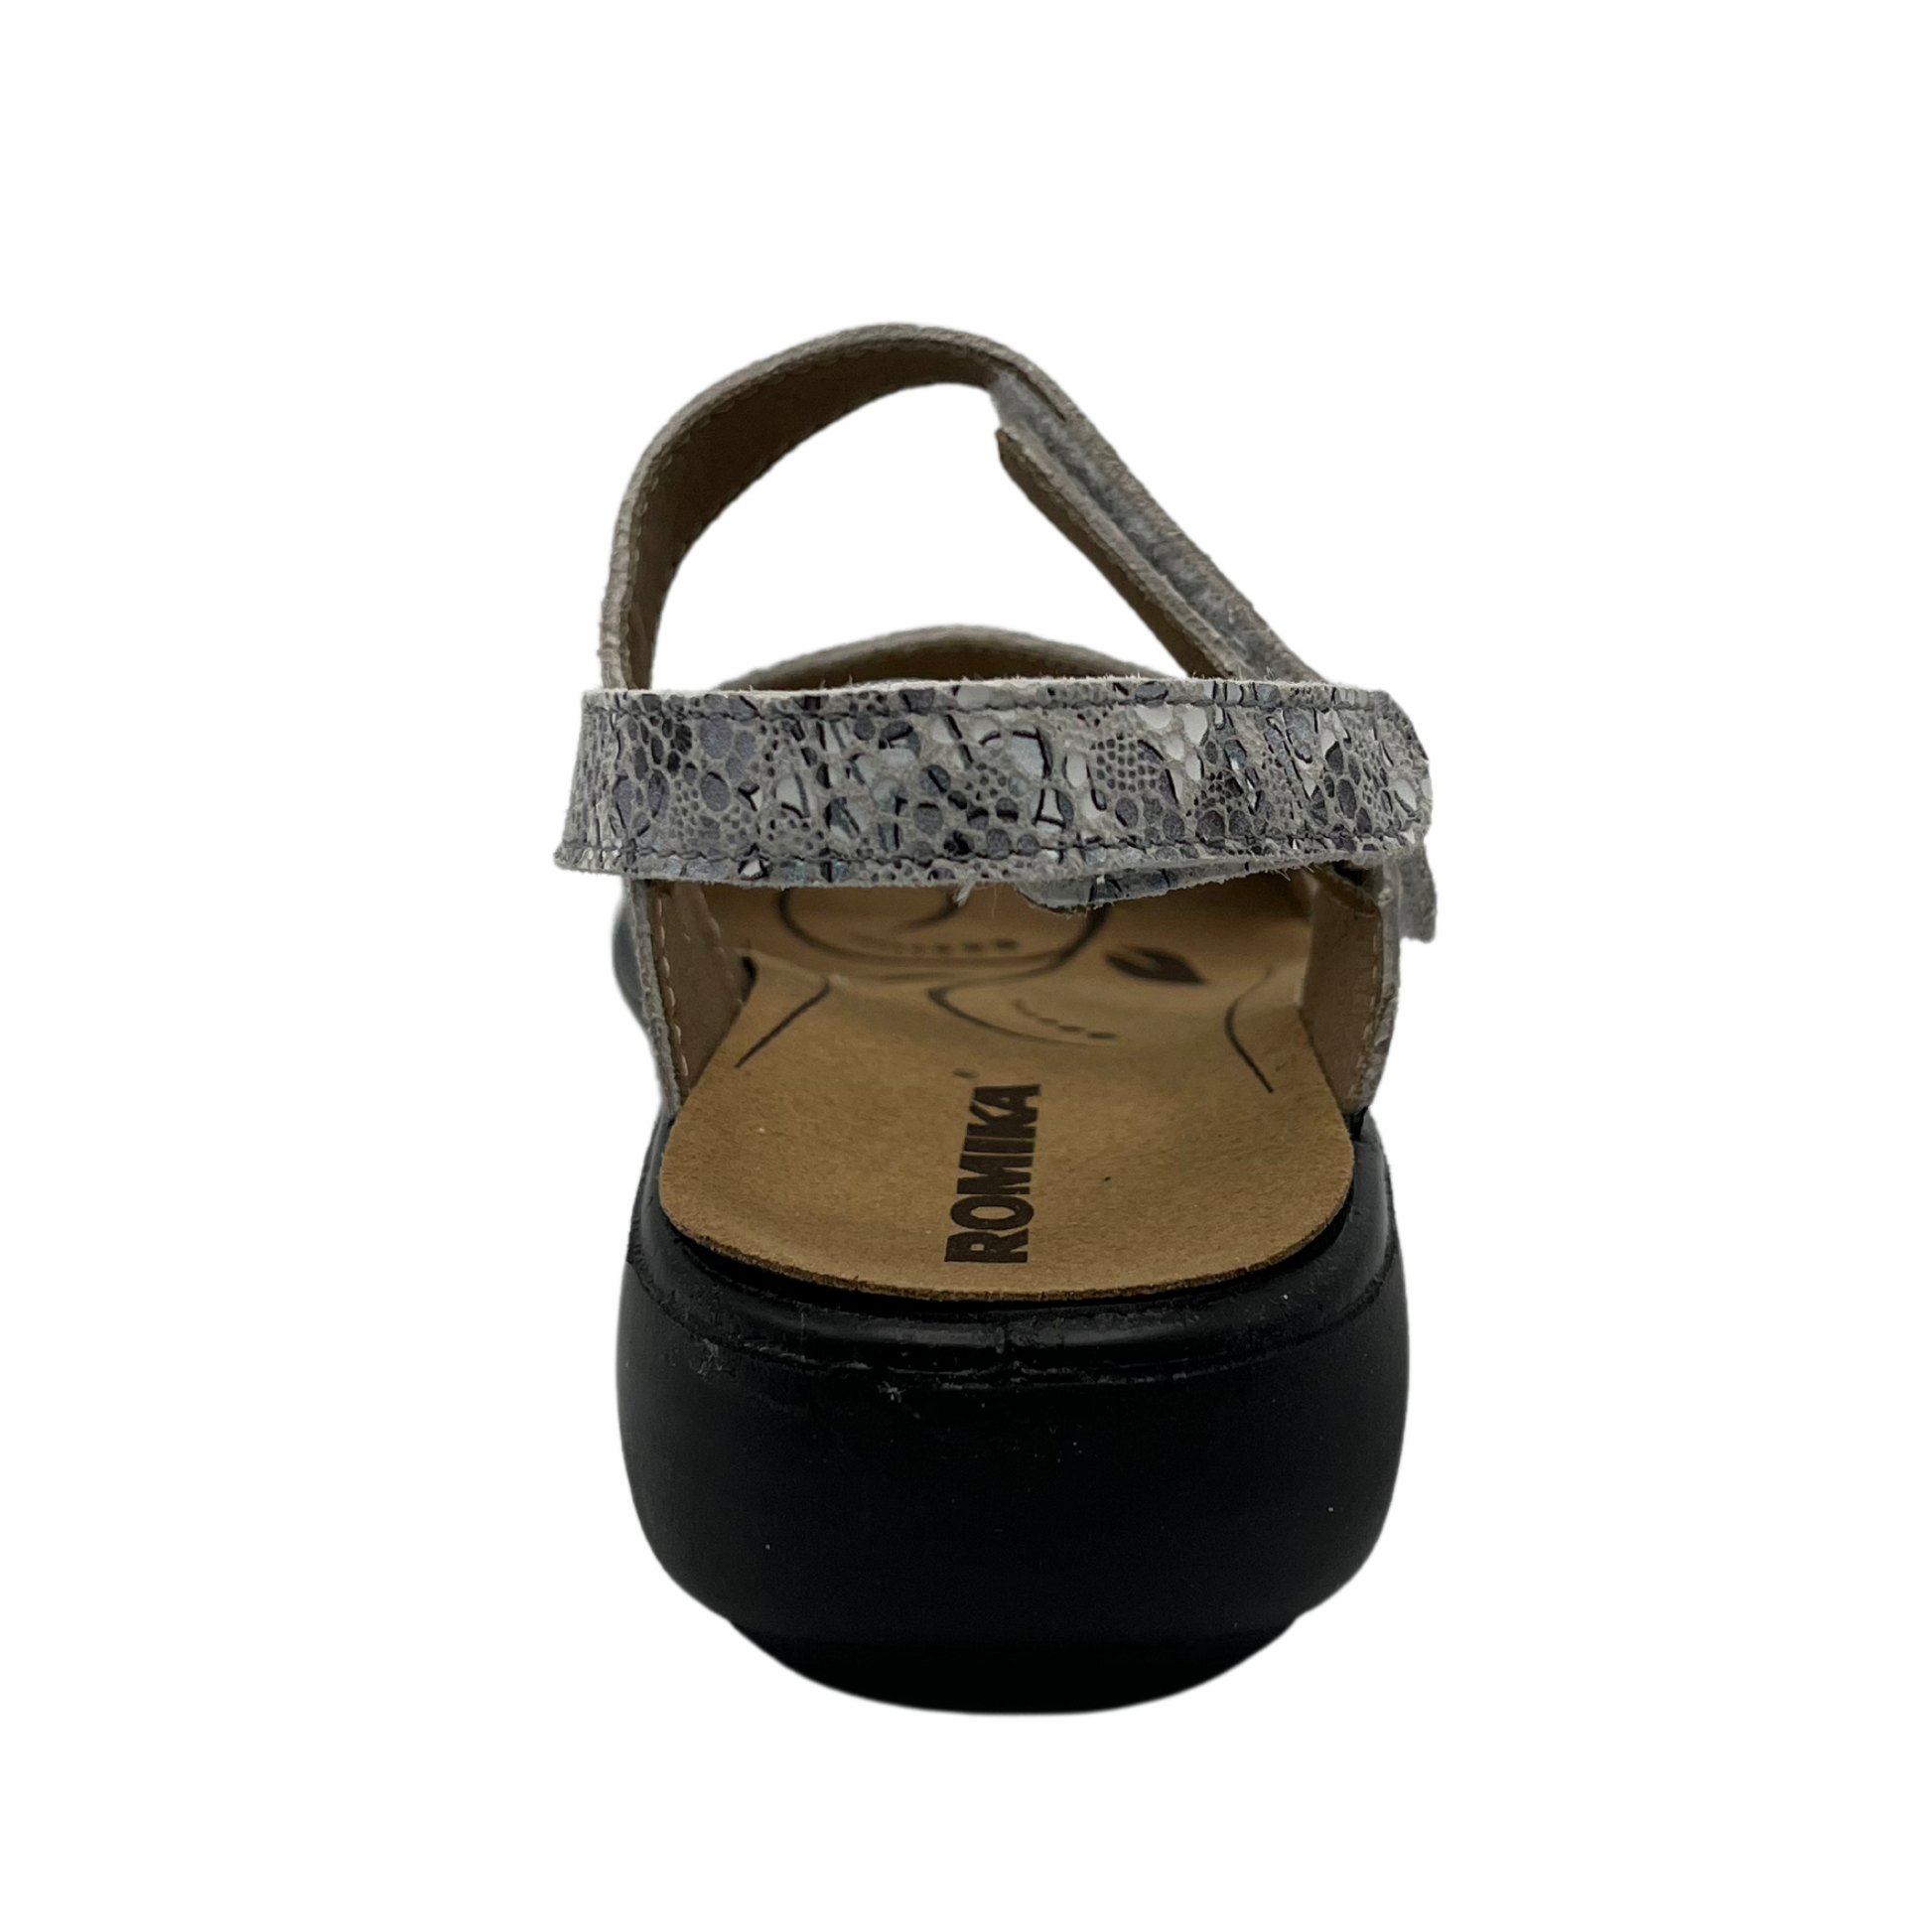 Back view of sandal with white and grey patterned straps and black rubber outsole